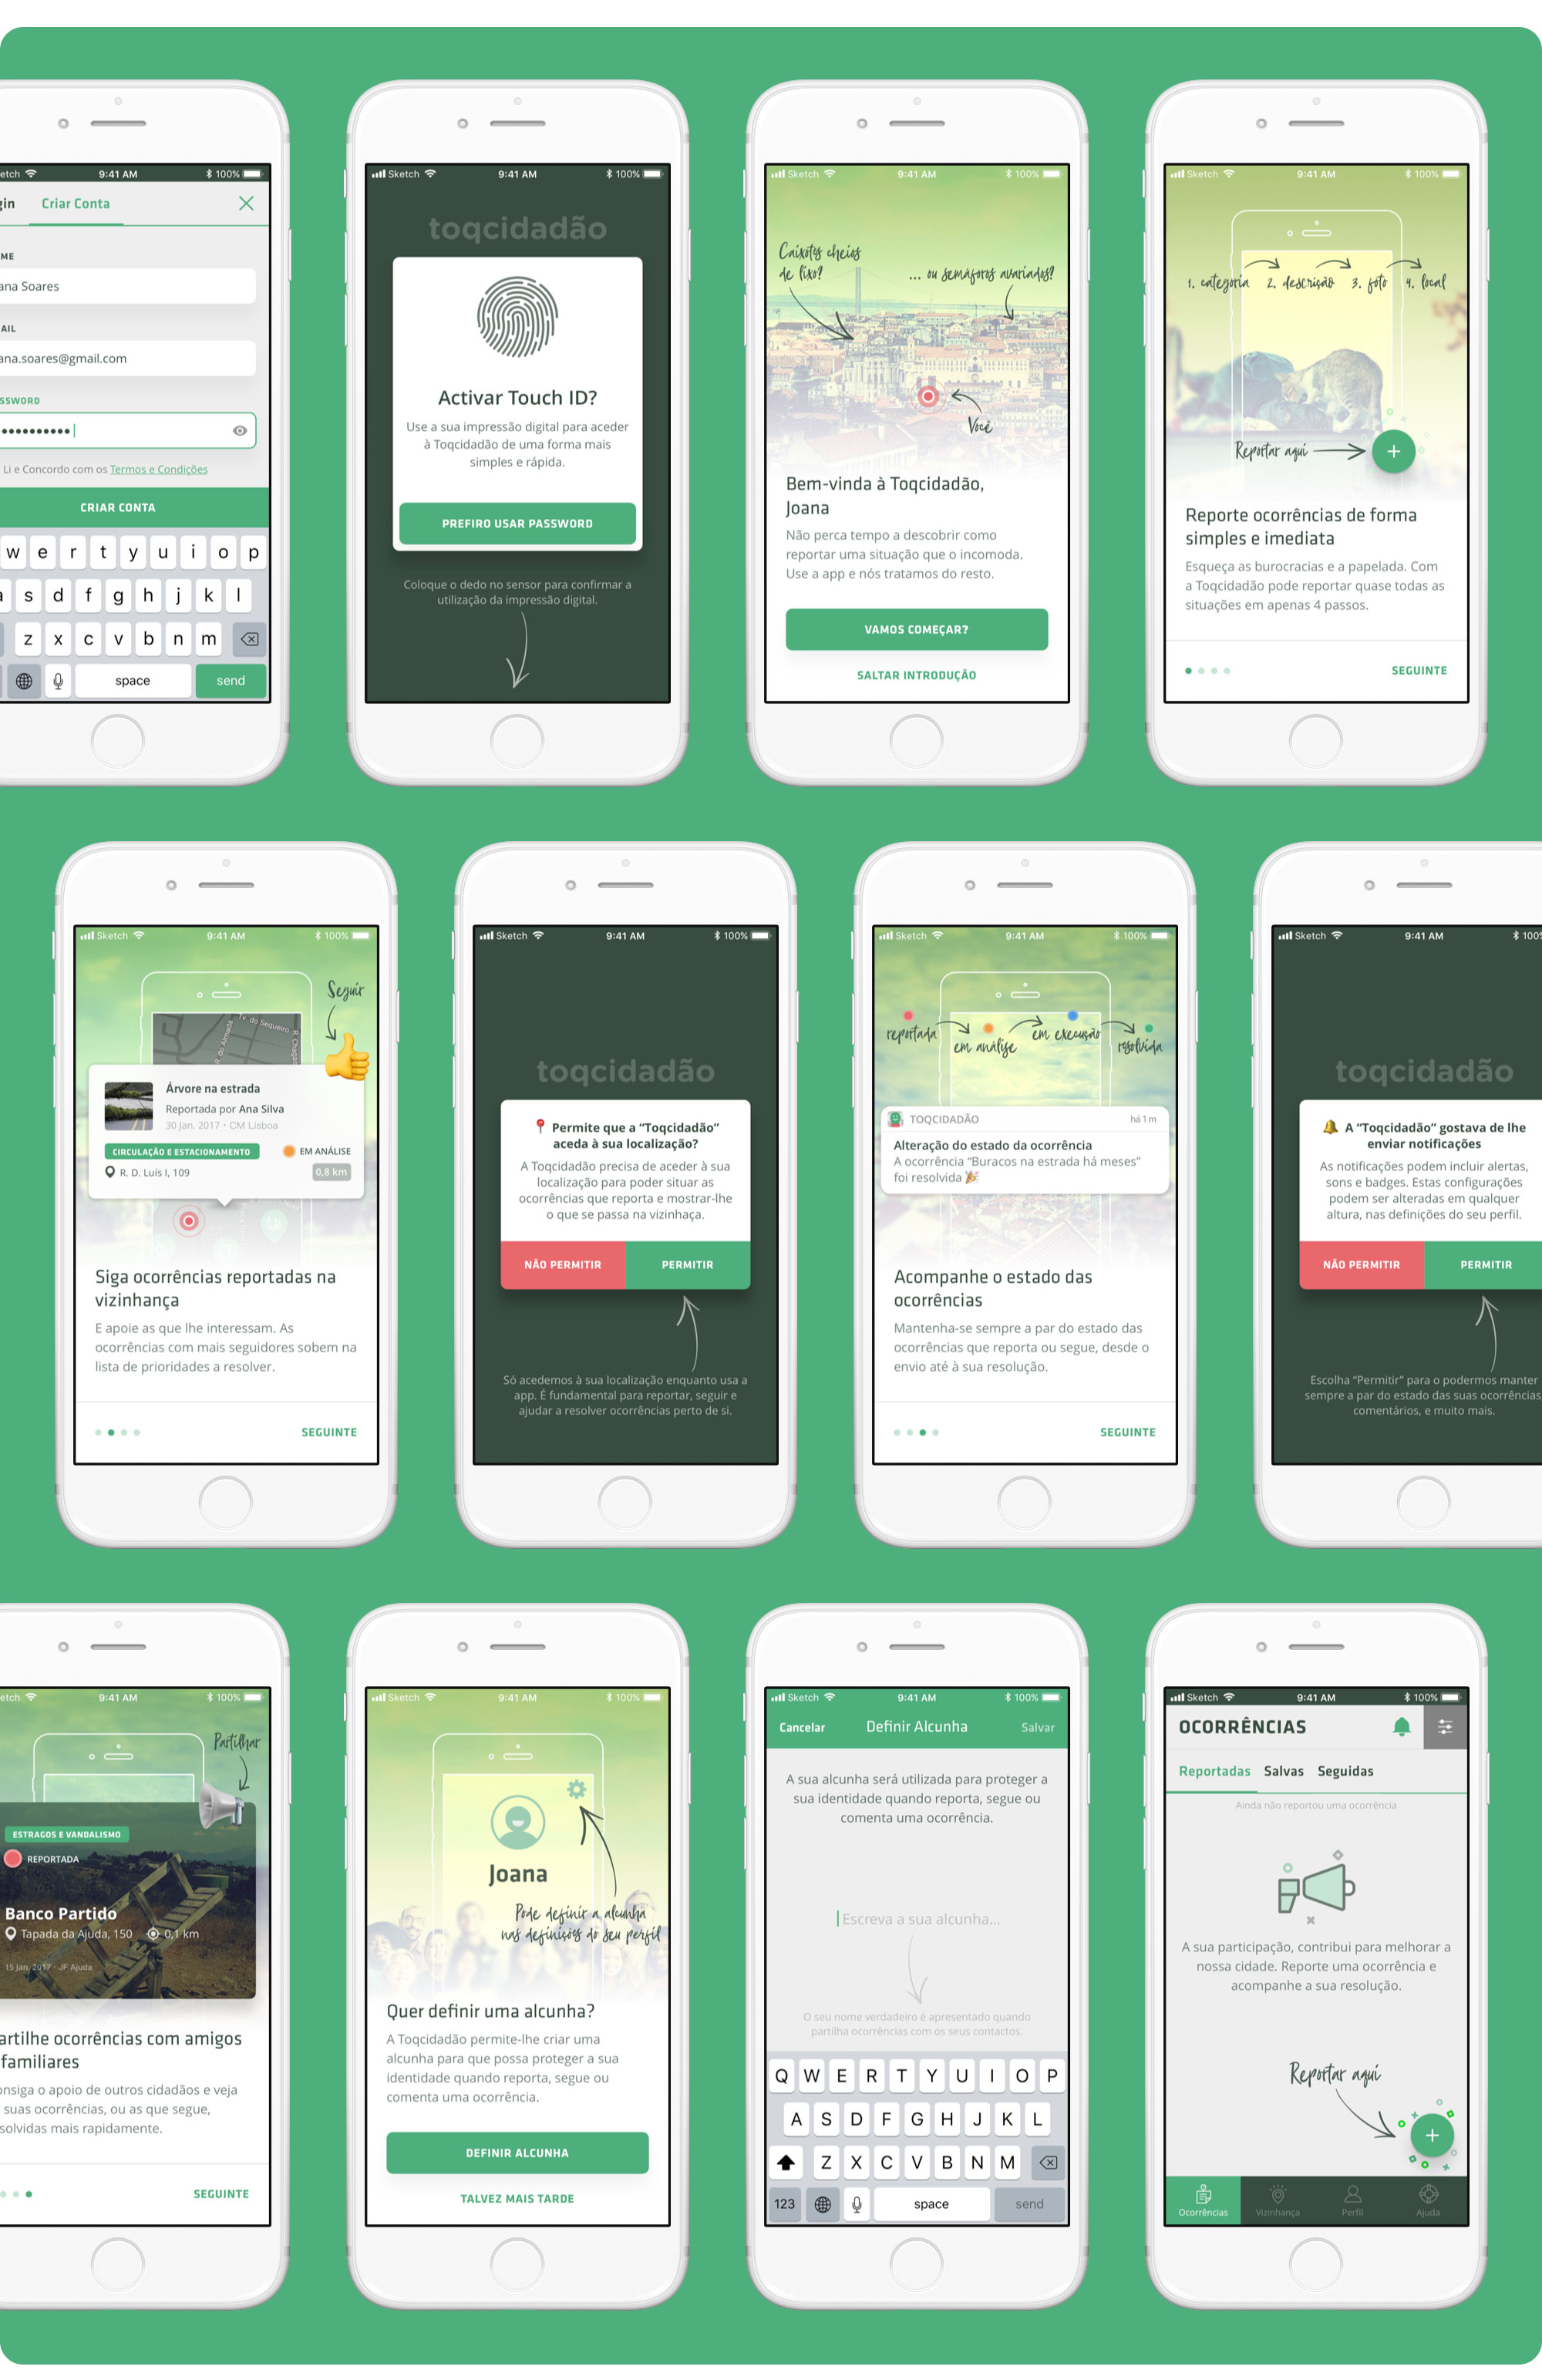 Toqcidadão’s register, onboarding and home screens